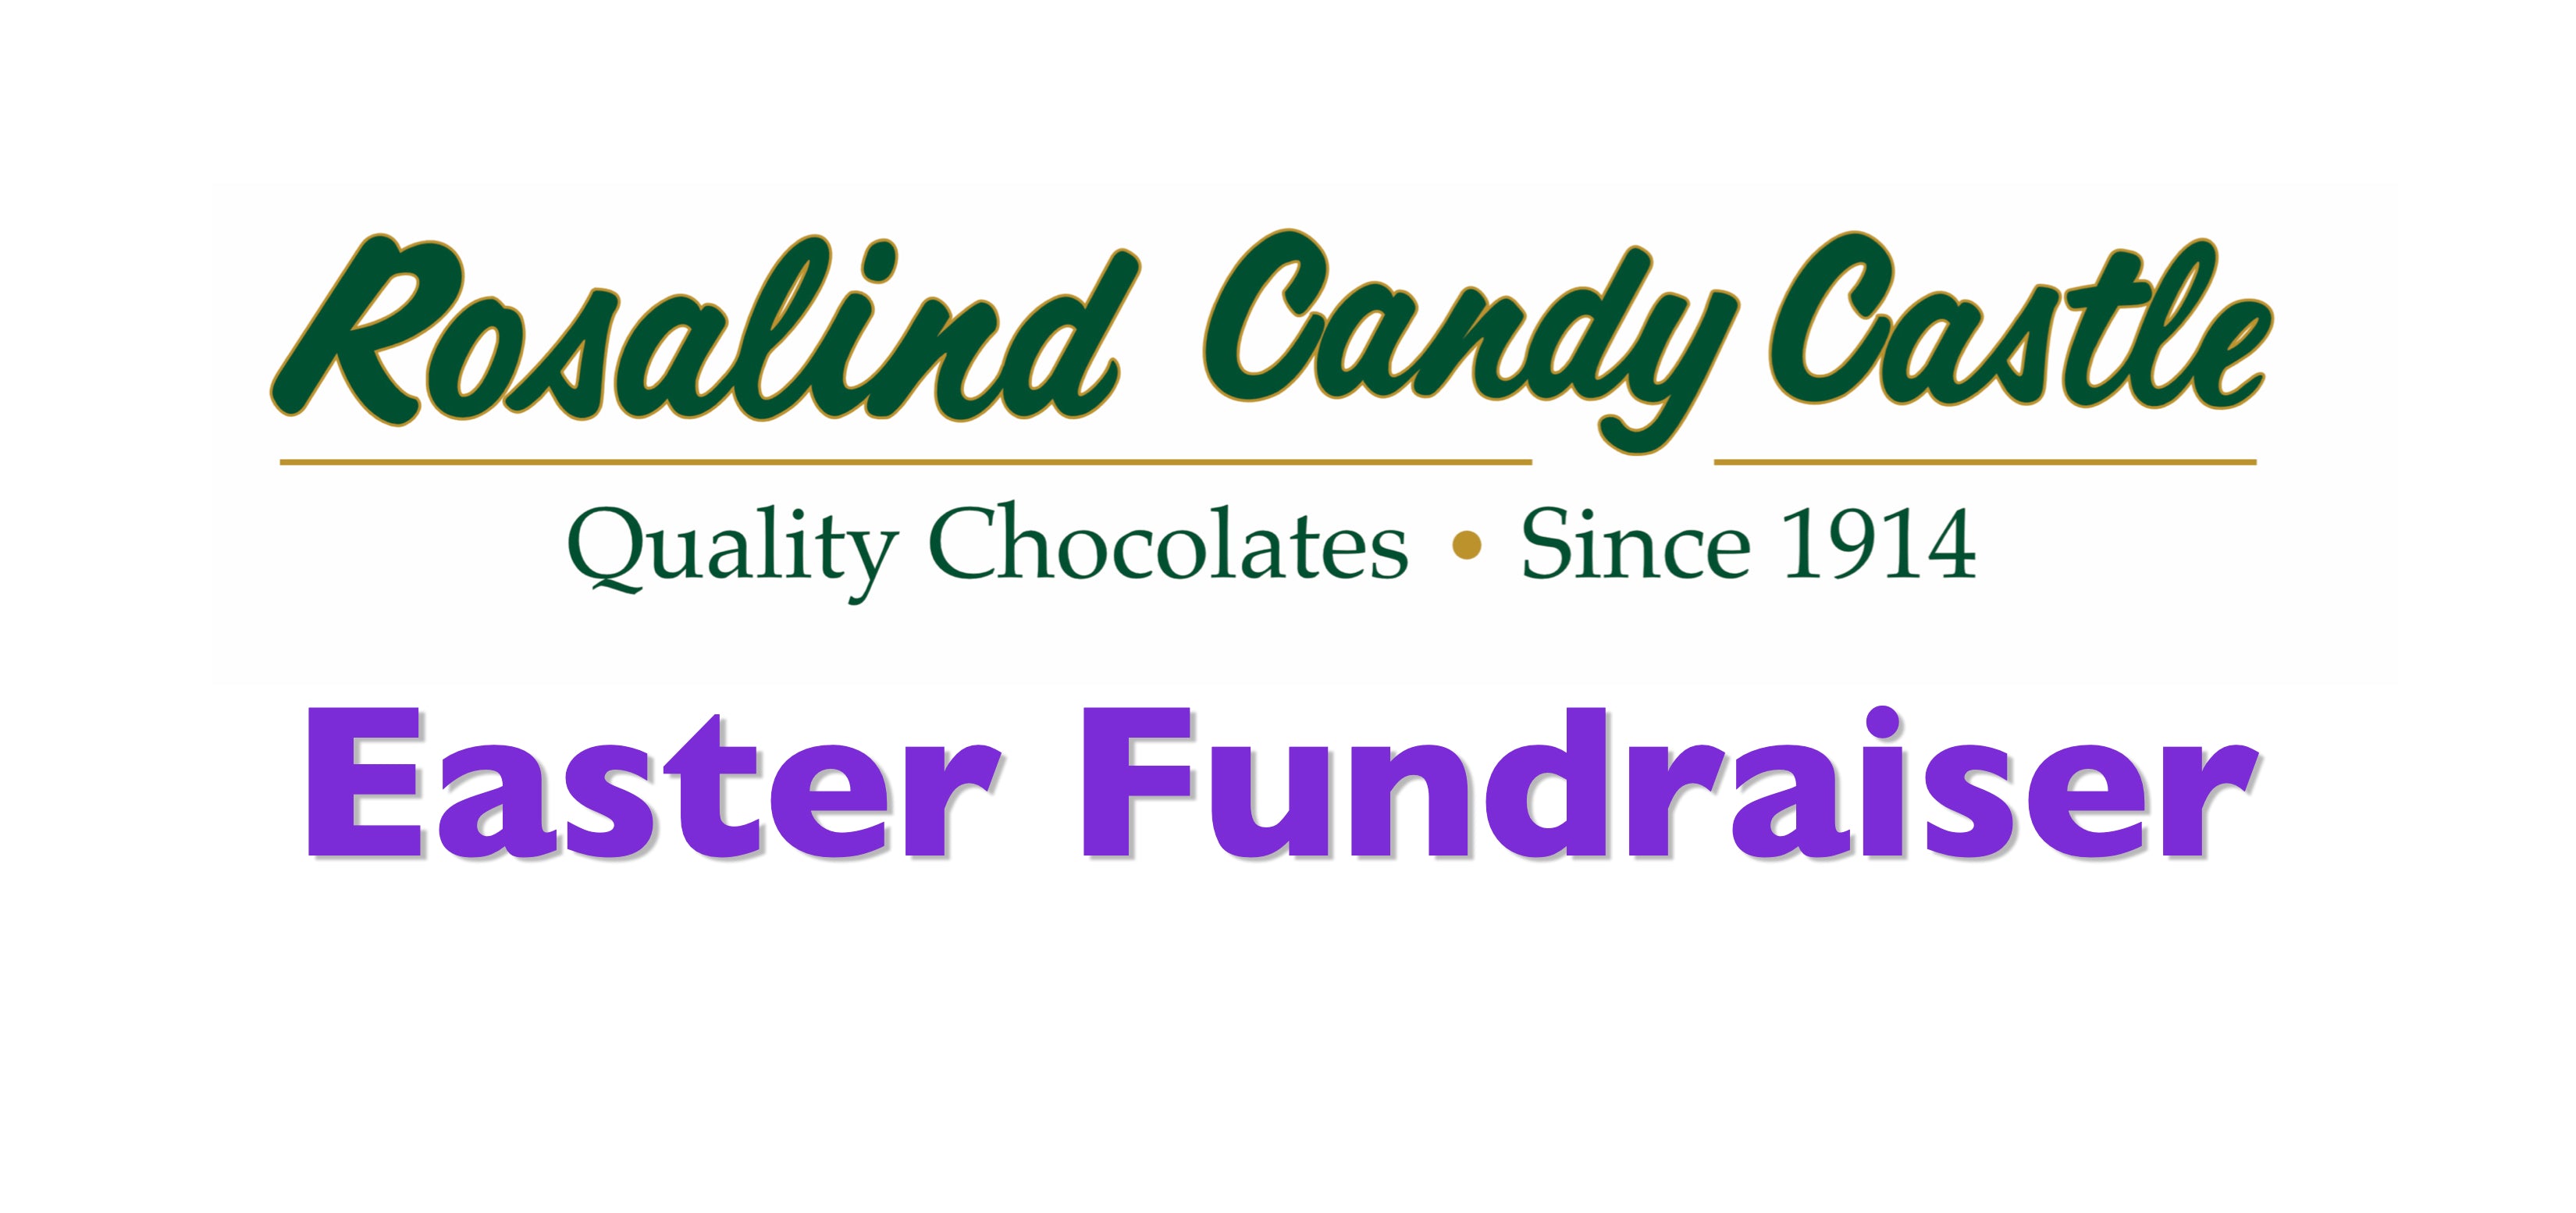 Rosalind Candy Castle Fundraising Page